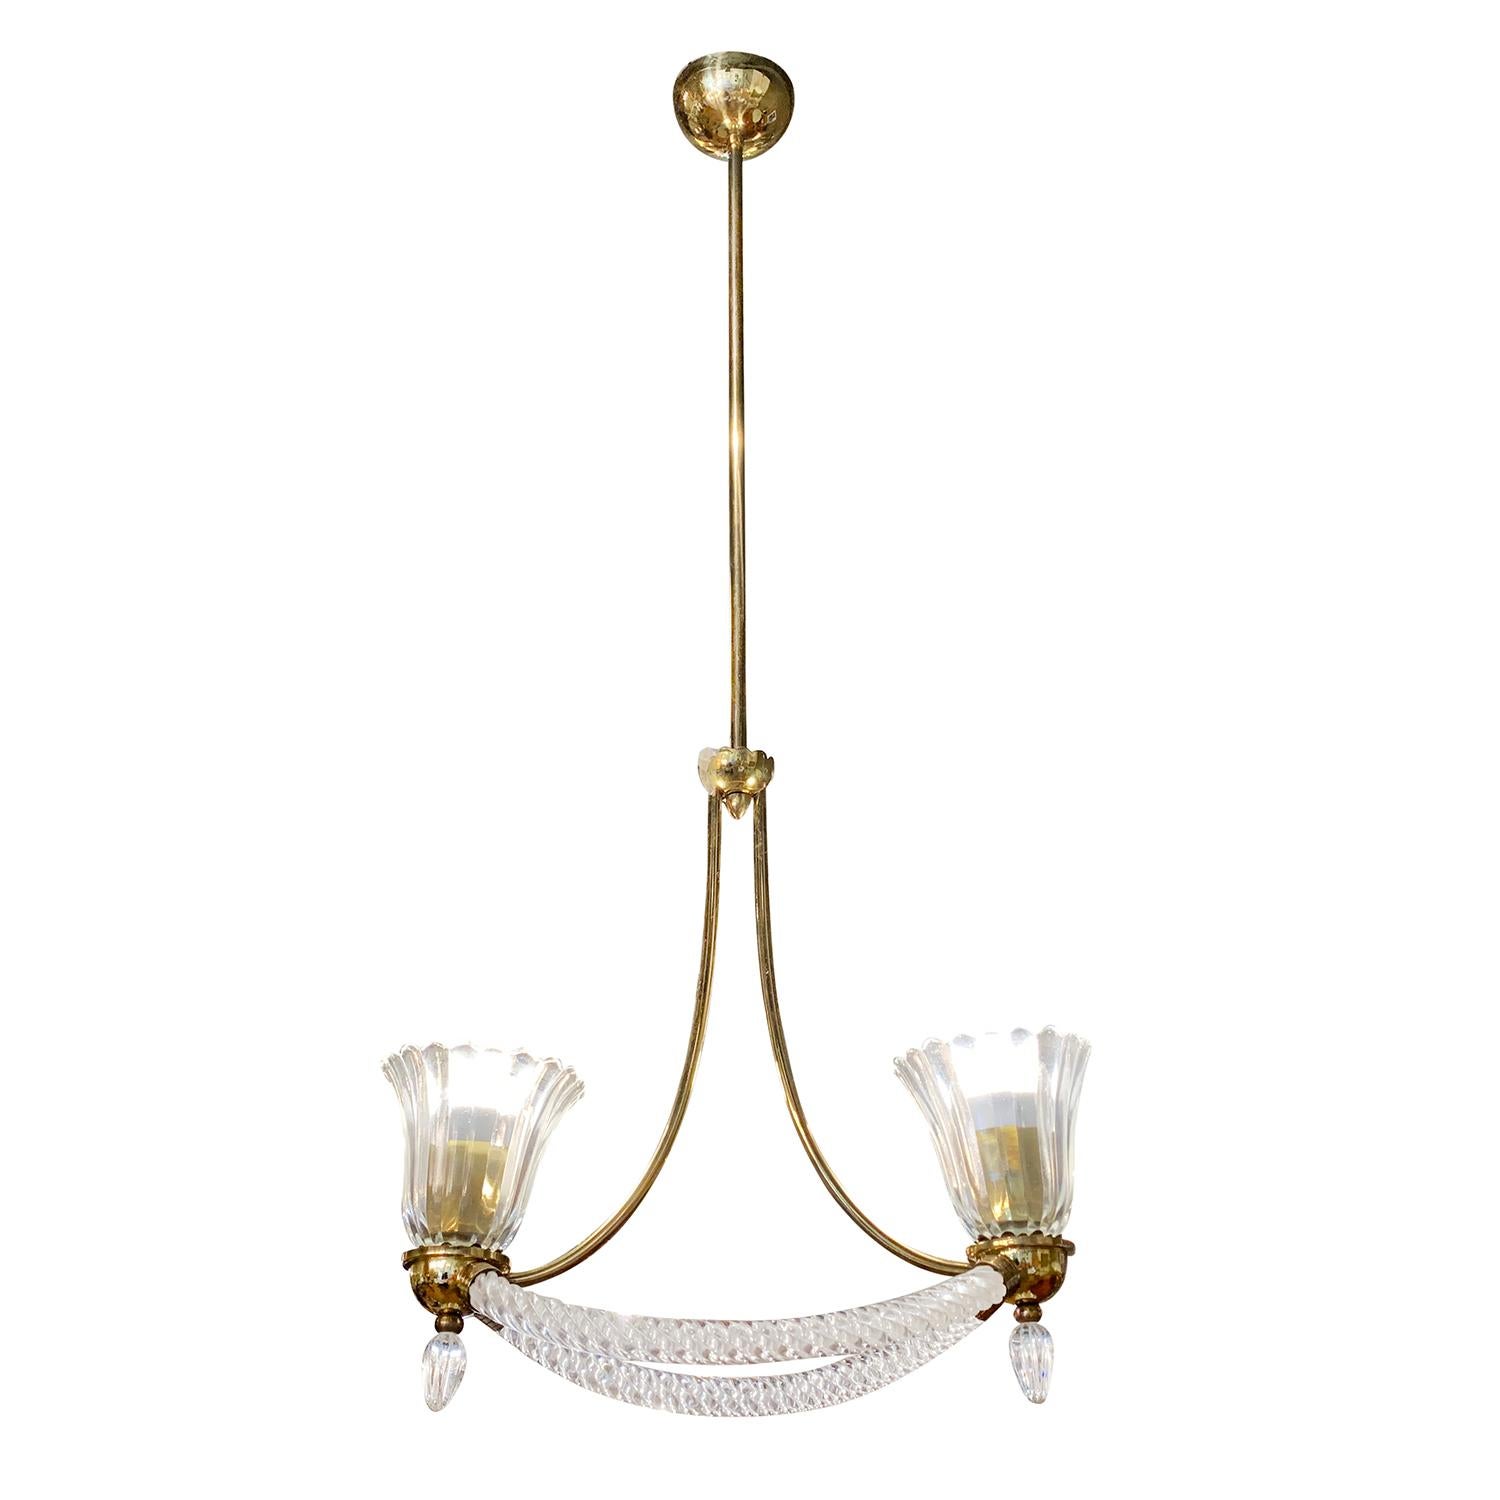 20th Century Italian Murano Glass Chandelier, Brass Pendant by Barovier & Toso In Good Condition For Sale In West Palm Beach, FL